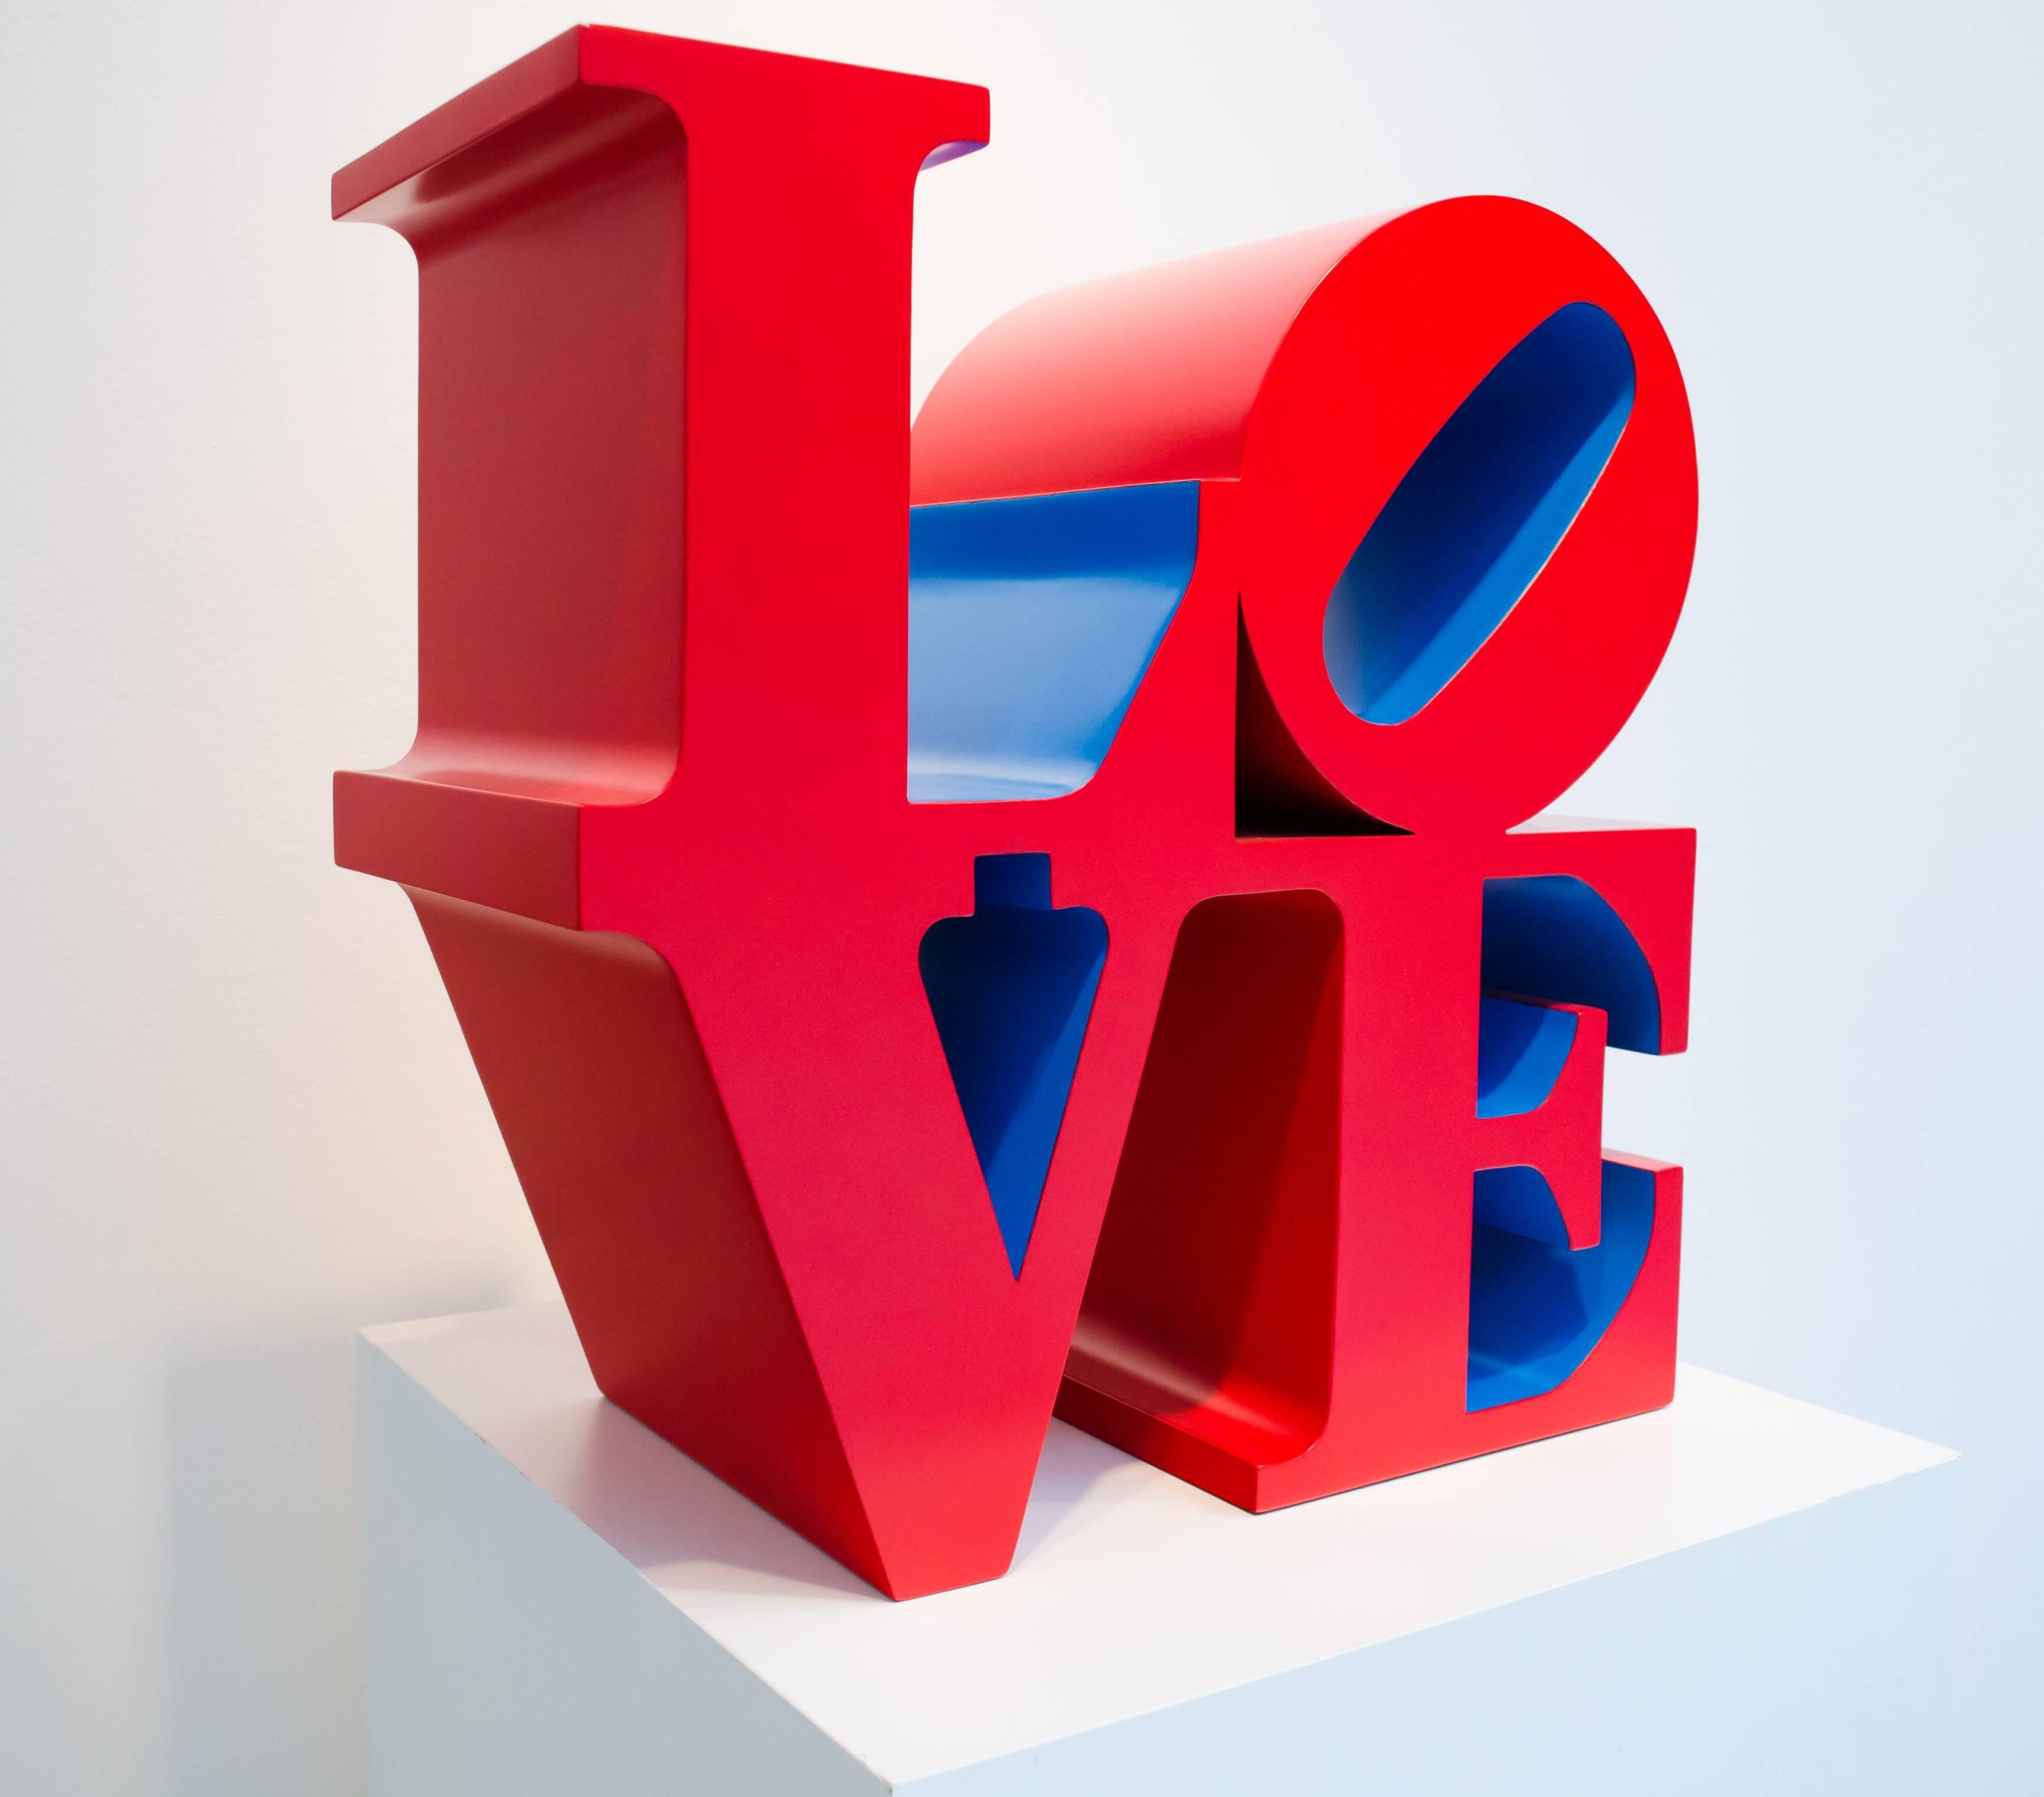 LOVE Red Outside Blue Inside - Sculpture by Robert Indiana